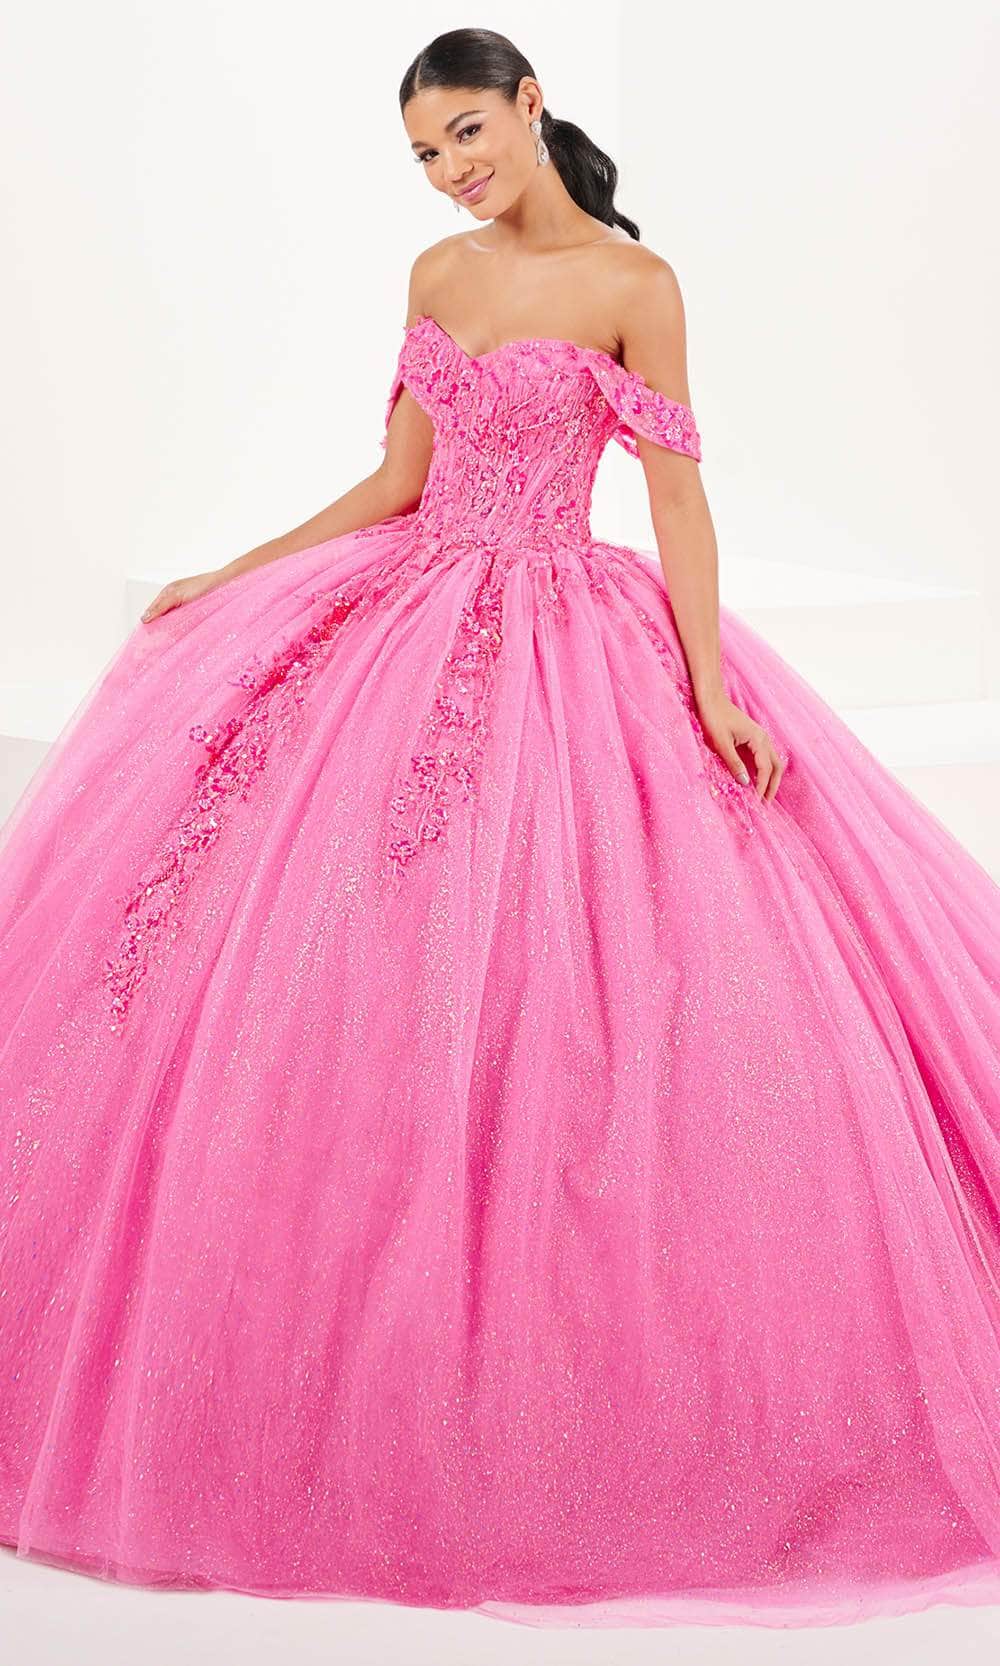 Image of Fiesta Gowns 56507 - Off-Shoulder Sweetheart Ballgown